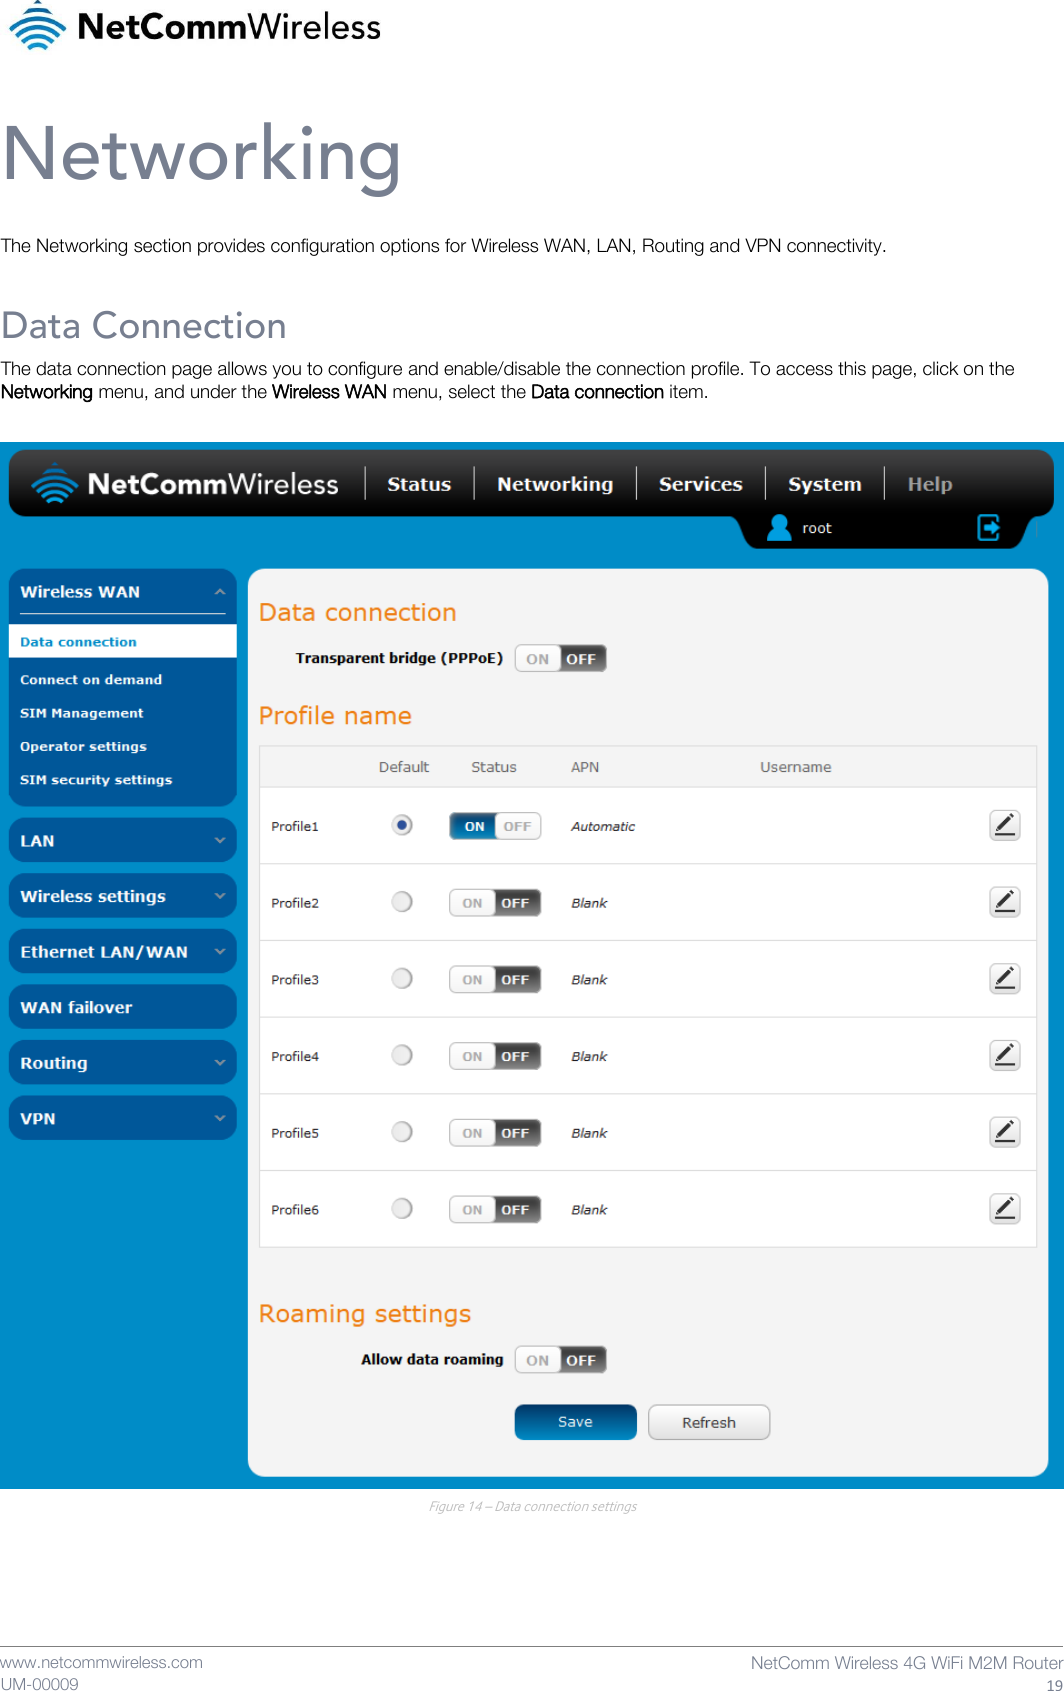    www.netcommwireless.com NetComm Wireless 4G WiFi M2M Router 19 UM-00009 Networking The Networking section provides configuration options for Wireless WAN, LAN, Routing and VPN connectivity. Data Connection The data connection page allows you to configure and enable/disable the connection profile. To access this page, click on the Networking menu, and under the Wireless WAN menu, select the Data connection item.   Figure 14 – Data connection settings   